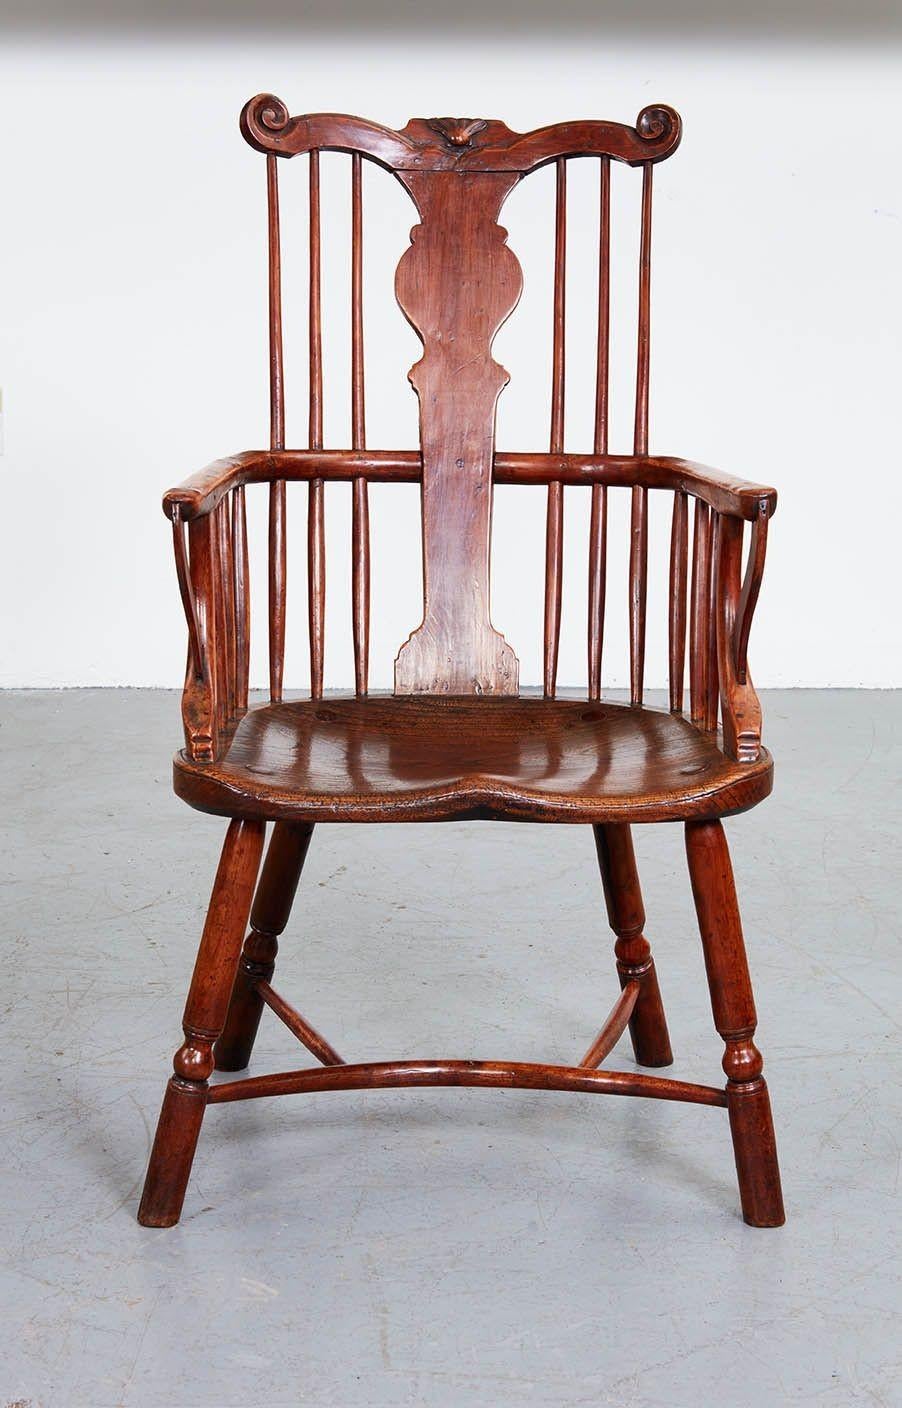 A fine windsor armchair with high comb back incorporating top rail with shell and scrolled ear ends, central shaped vasiform splat over continuous bent arm with forward arm supports, on saddled seat, standing on turned legs joined by crenoline